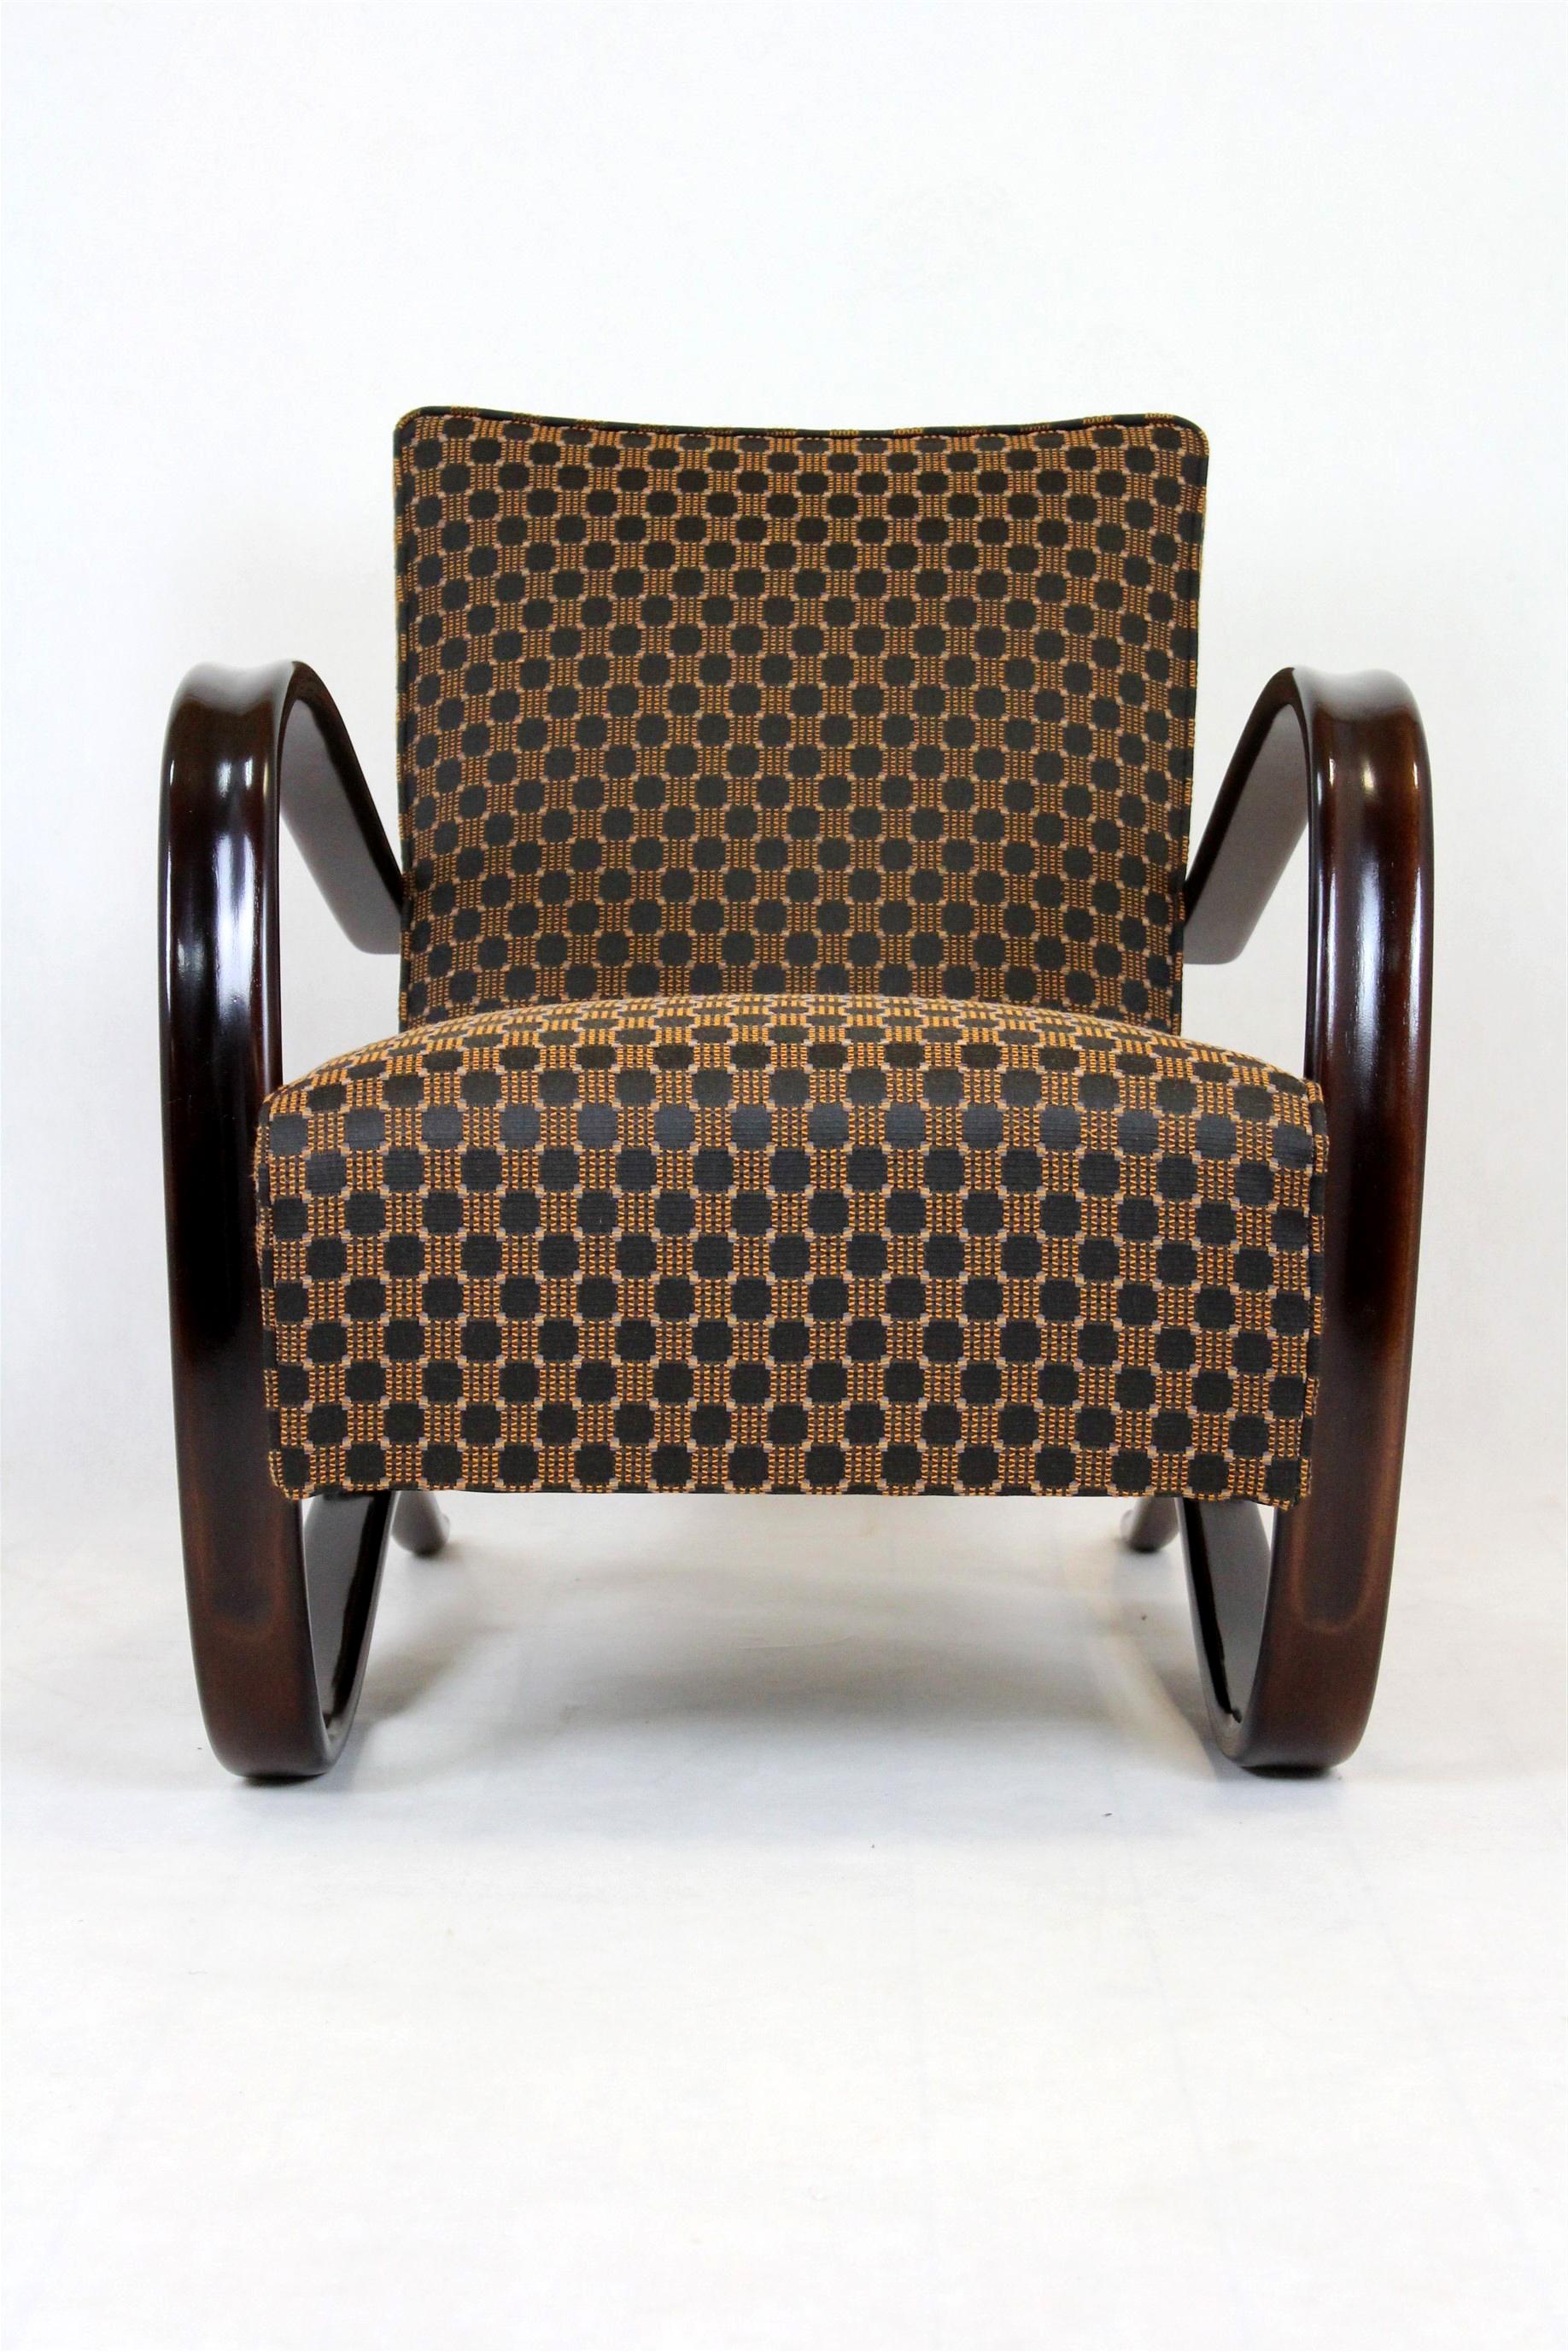 This legendary H-269 armchair was designed by Jindrich Halabala around 1930 and produced by UP Zavody. It is one of the most famous Czechoslovak designs.
The armchair has been completely restored - new filling, new springs, upholstered with